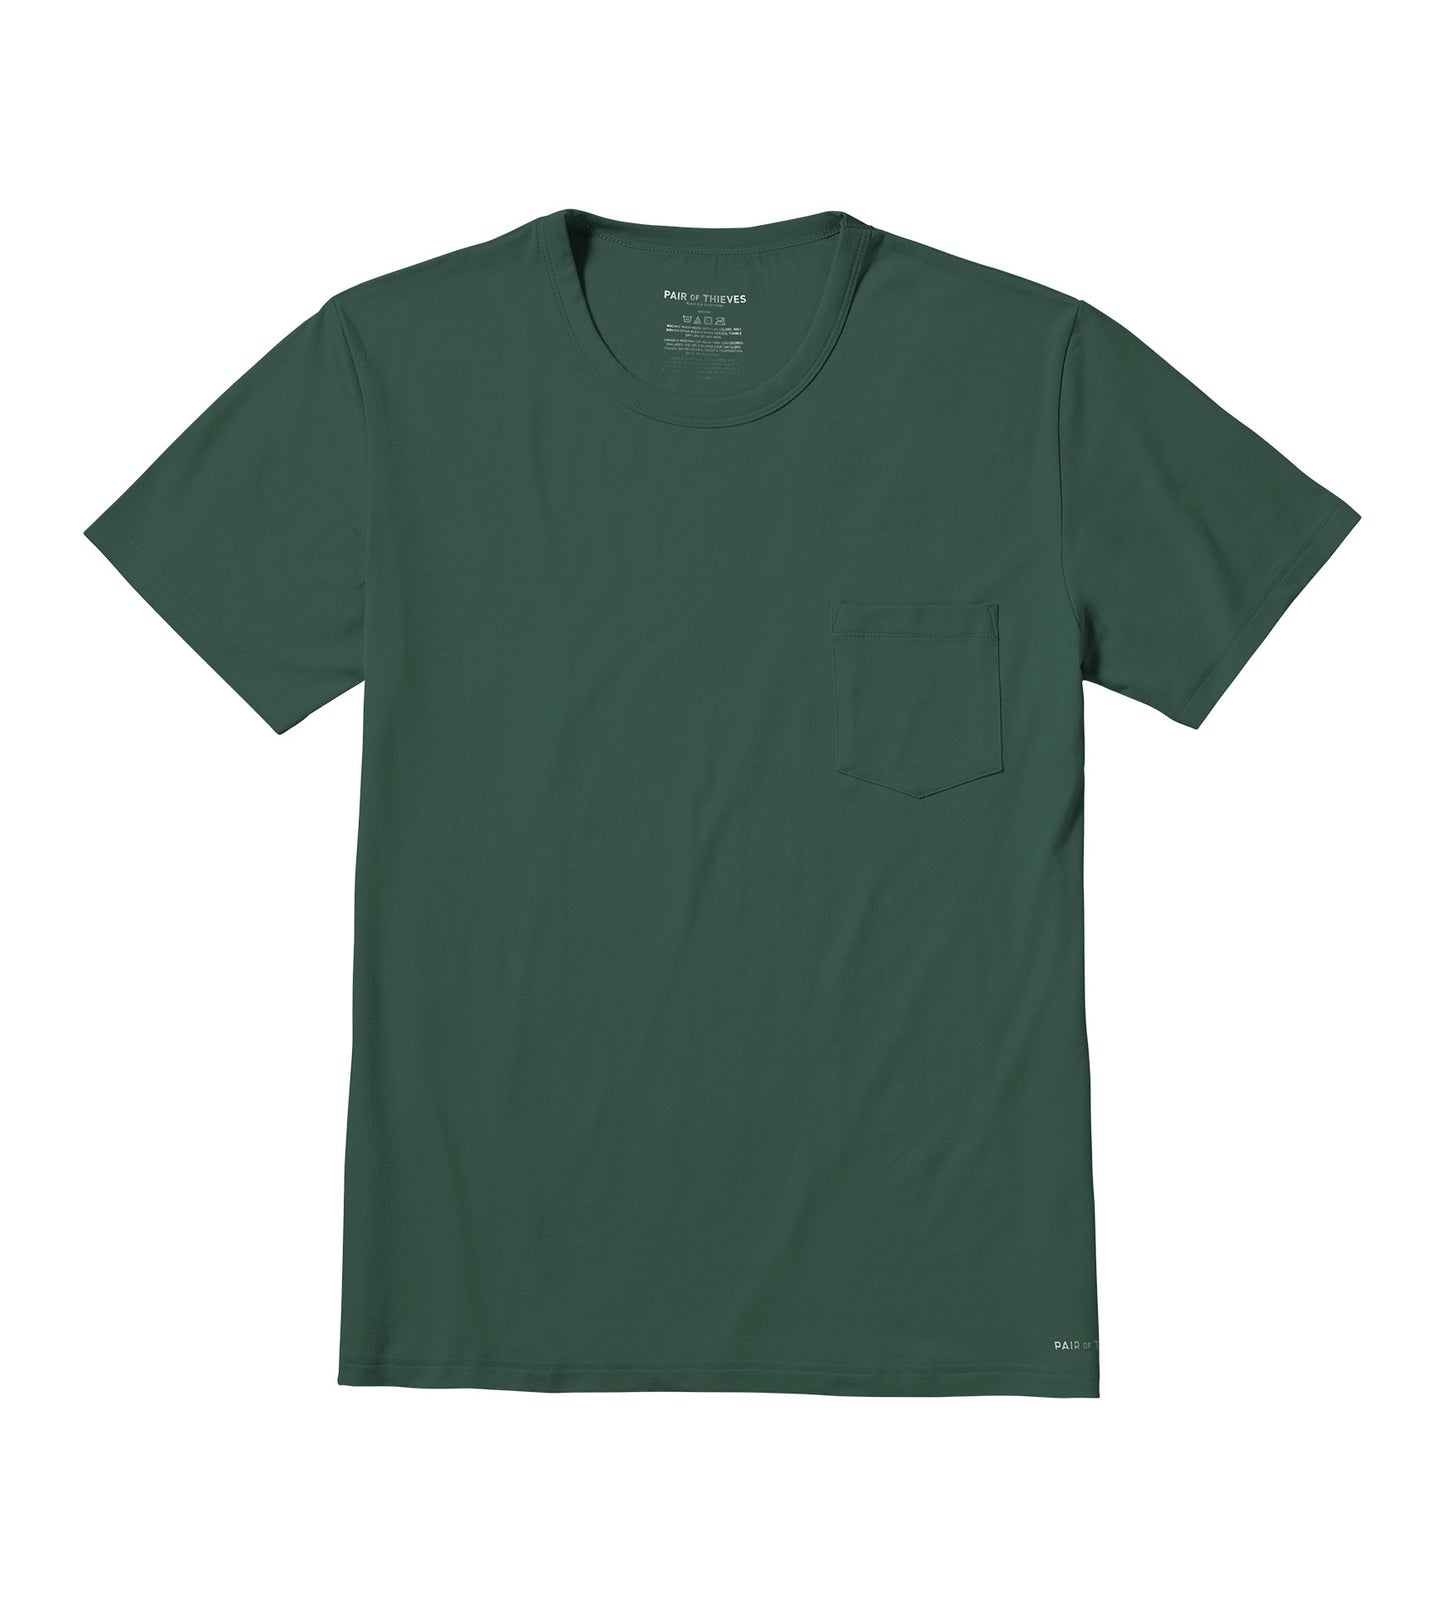 SuperSoft Crew Neck Pocket Tee colors contain: Dark slate gray, Dark Gray, Dark slate gray, Dark slate gray, Dark slate gray, Dim gray, Dark slate gray, Light Gray, Black